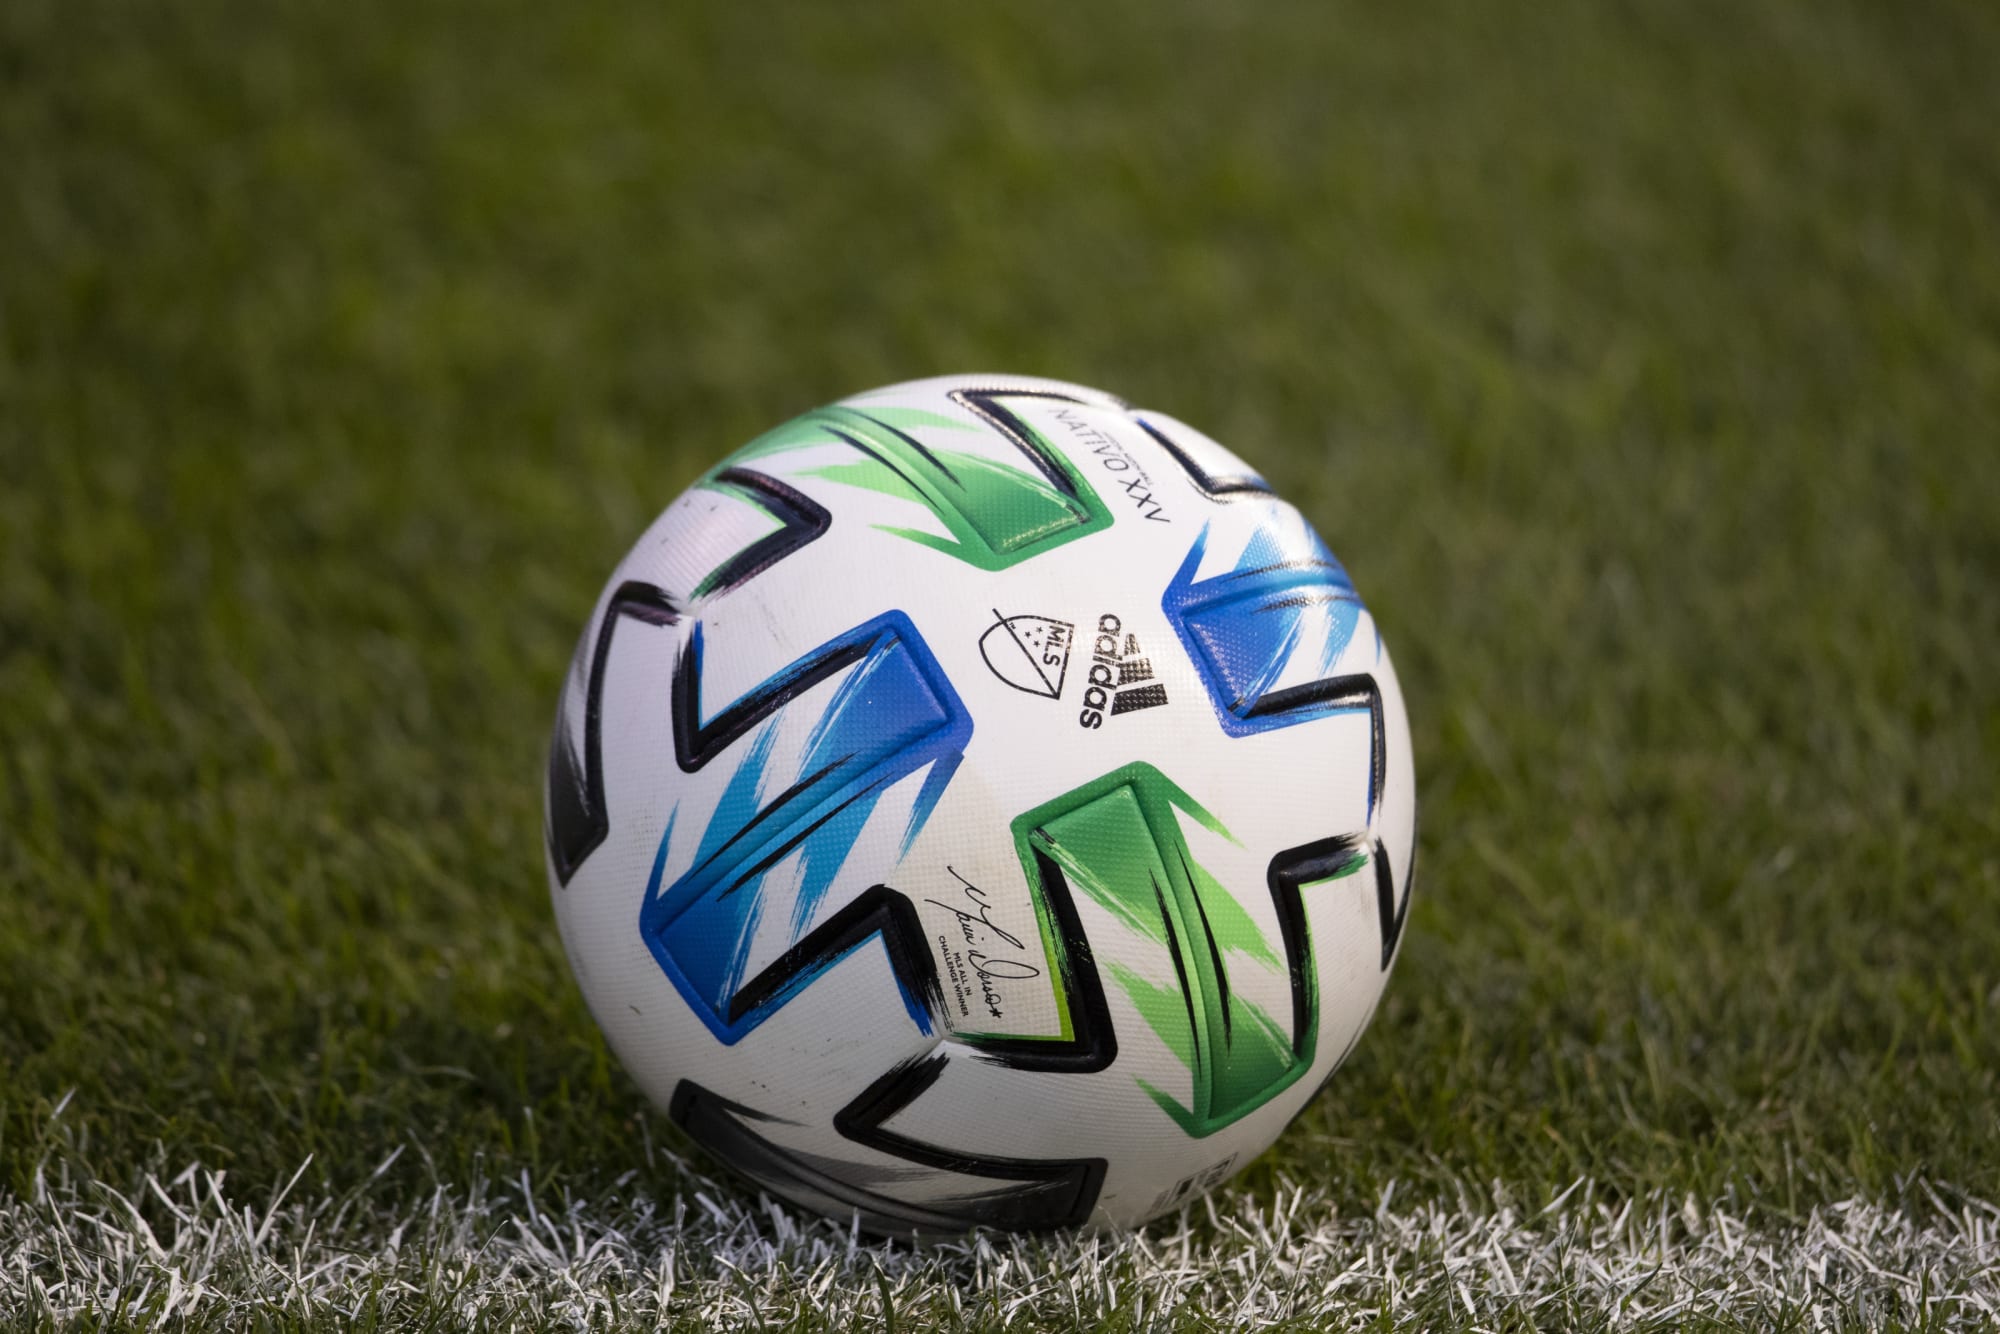 MLS 2021 official match ball proves range of supporters